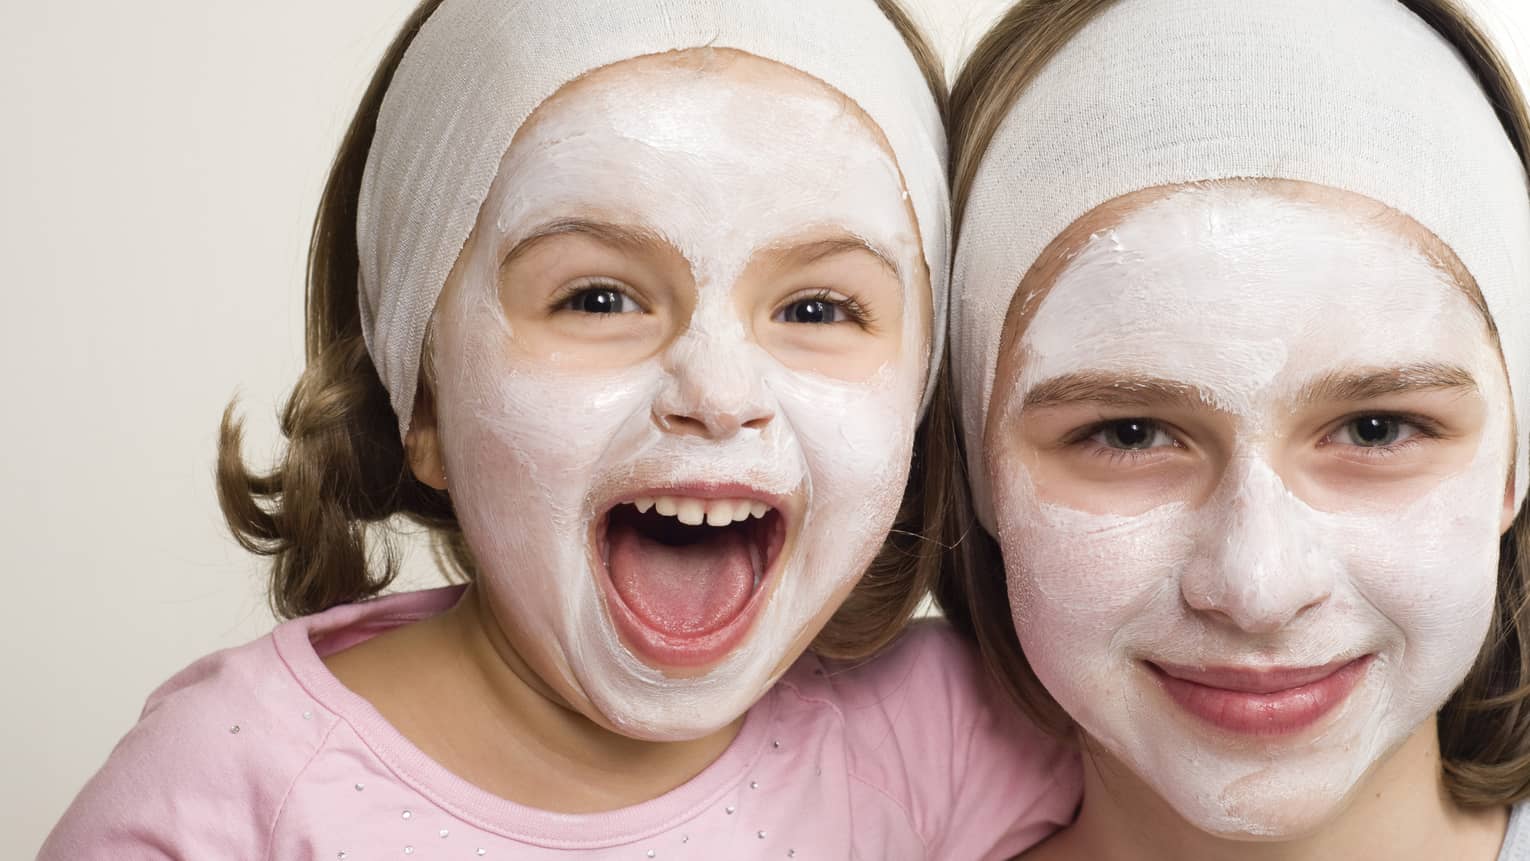 Two young girls with white clay spa masks on faces, towel wraps around foreheads